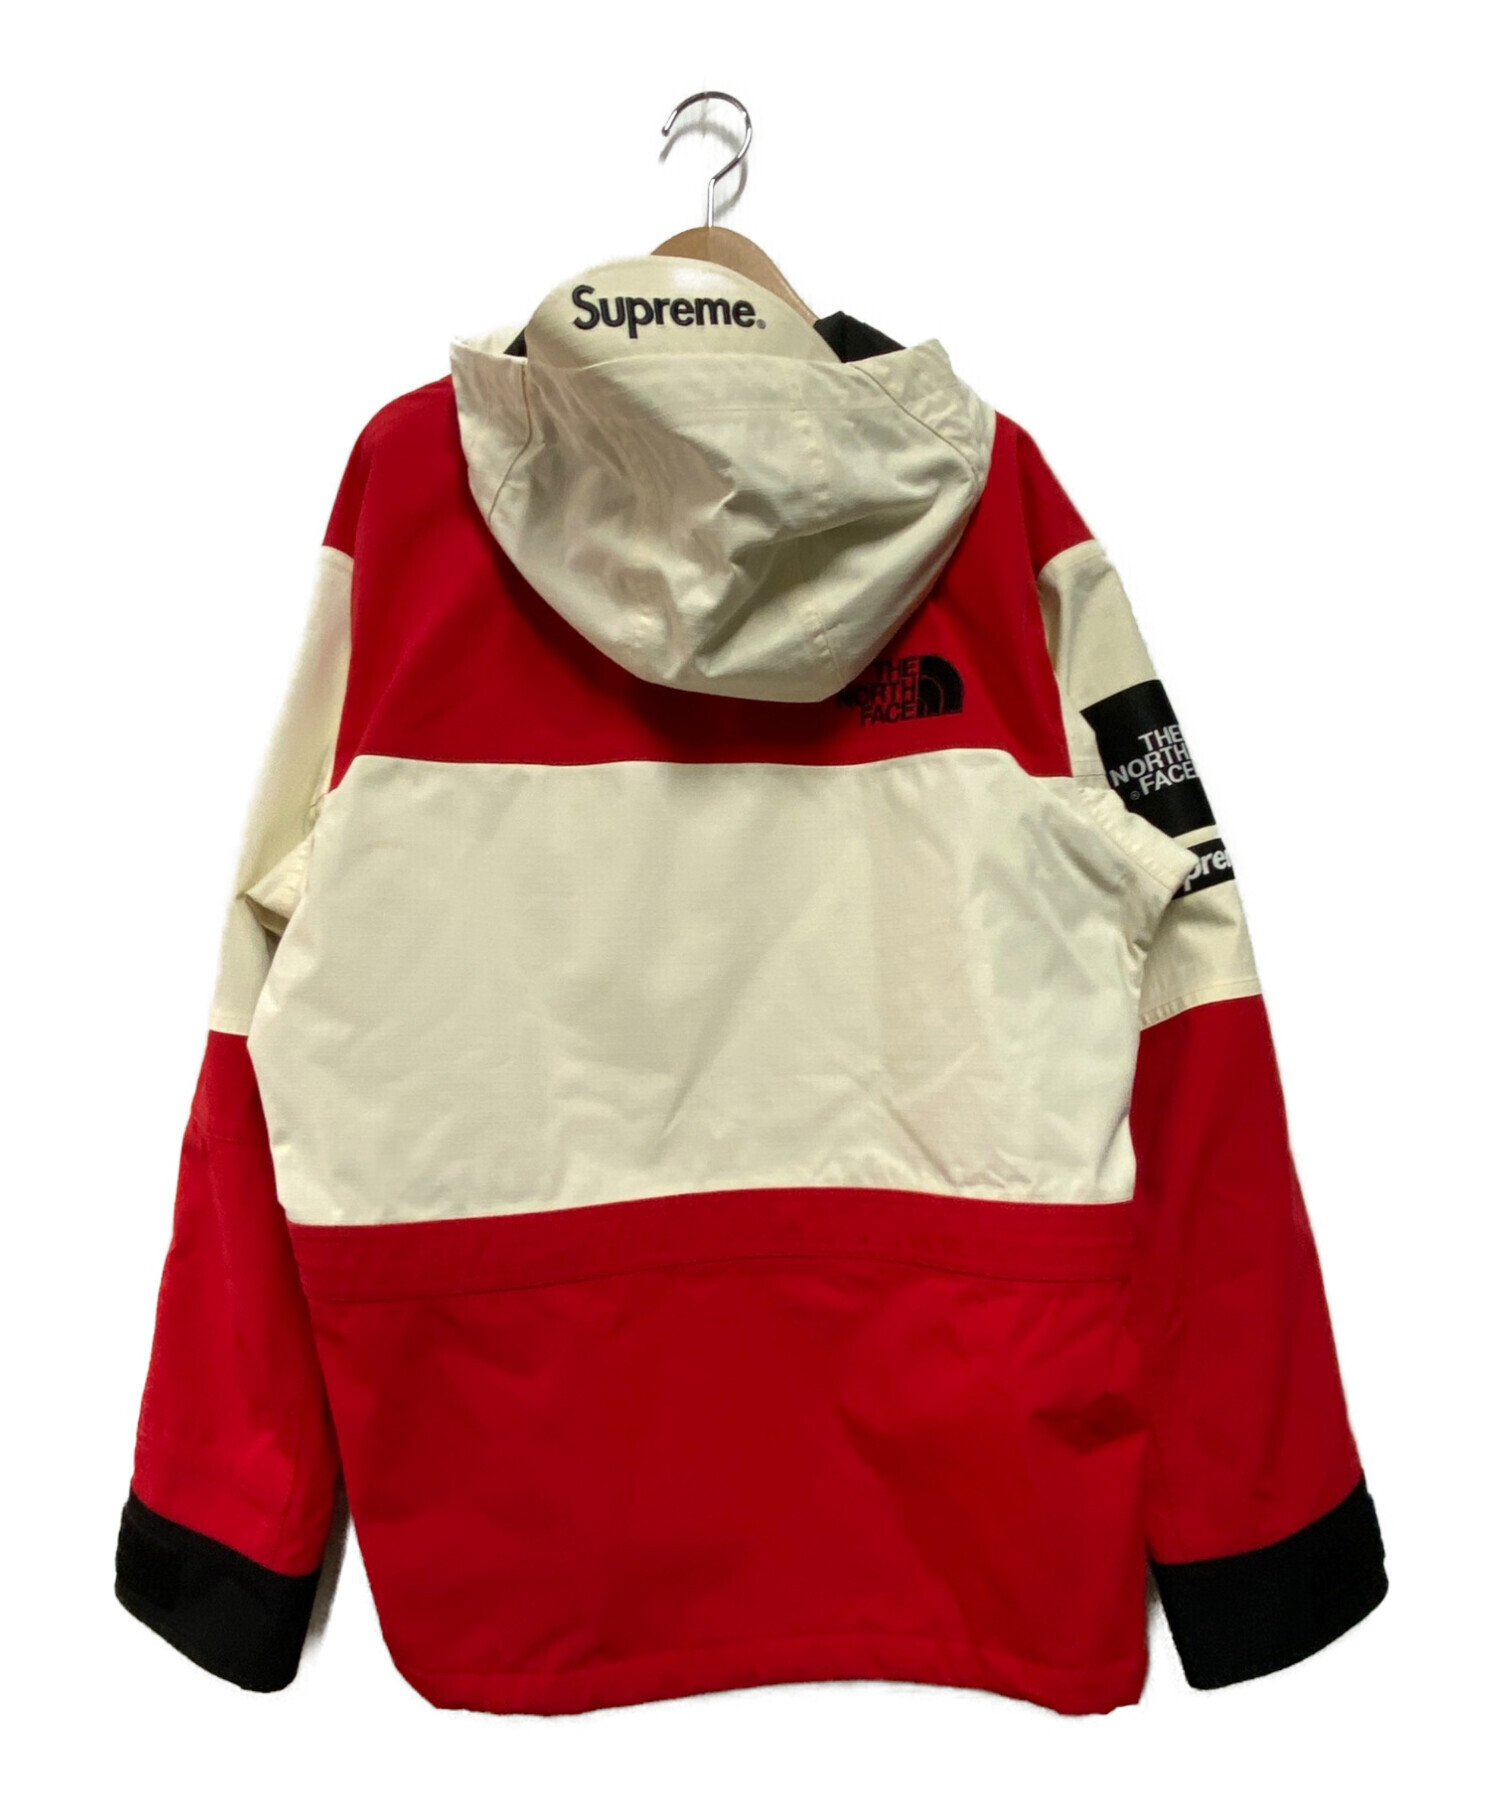 Supreme x TNF Expedition Mountain Jacket